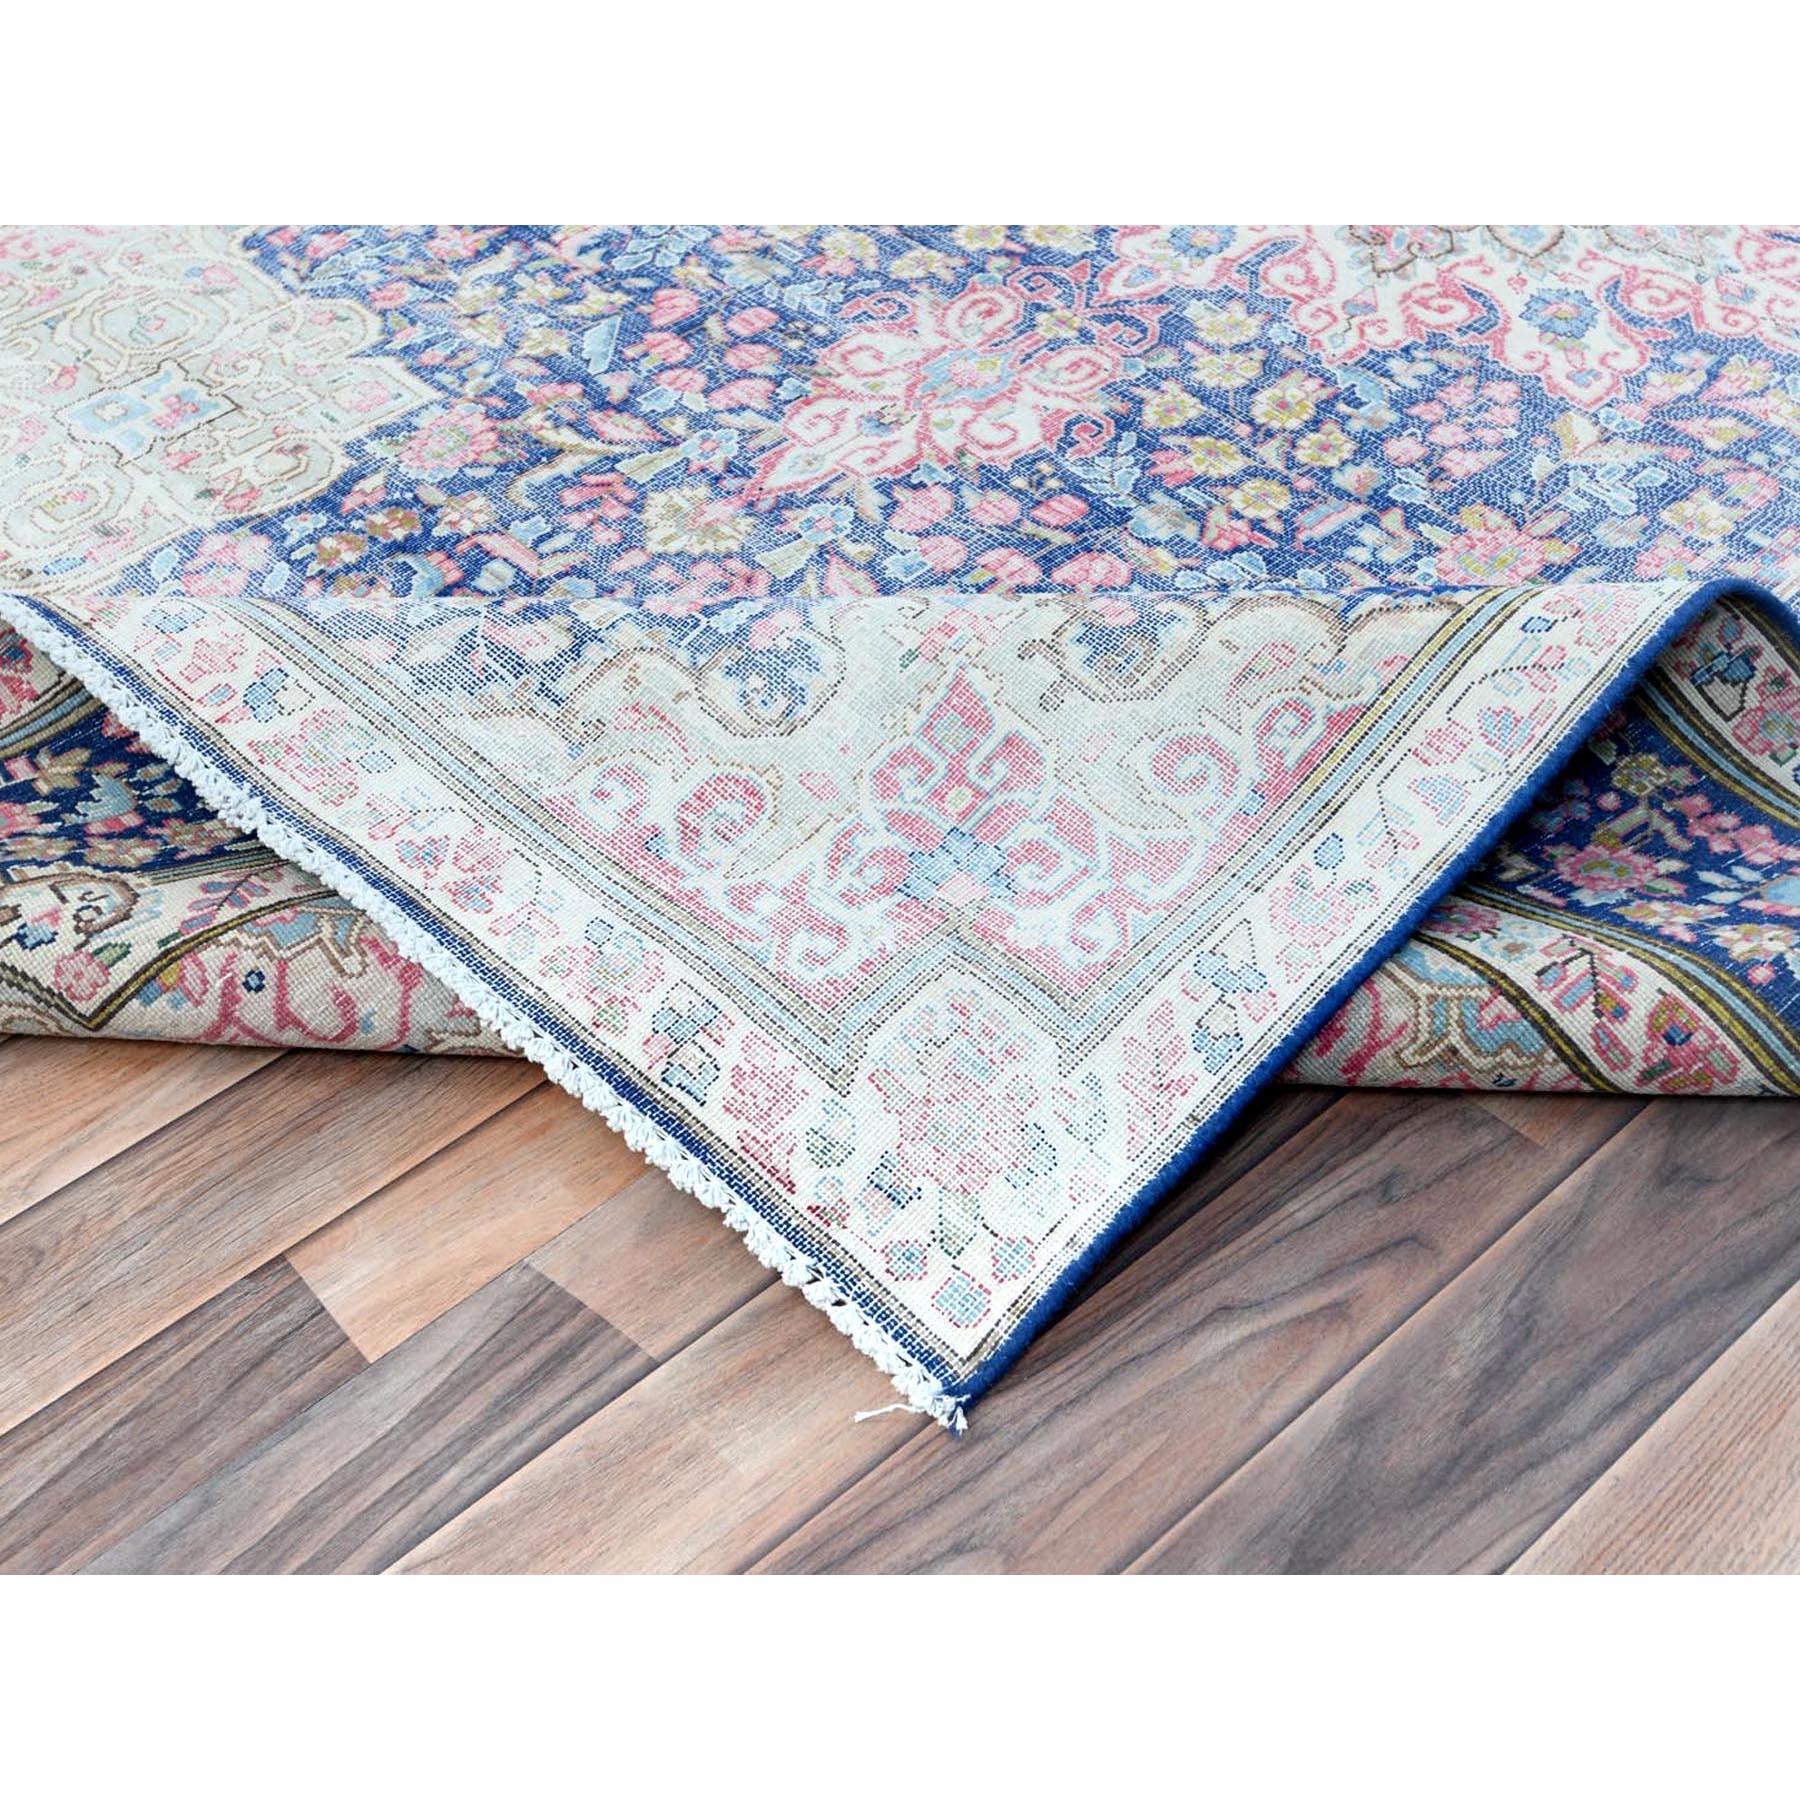 Denim Blue Vintage Persian Kerman Worn Wool Hand Knotted Distressed Look Rug In Good Condition For Sale In Carlstadt, NJ